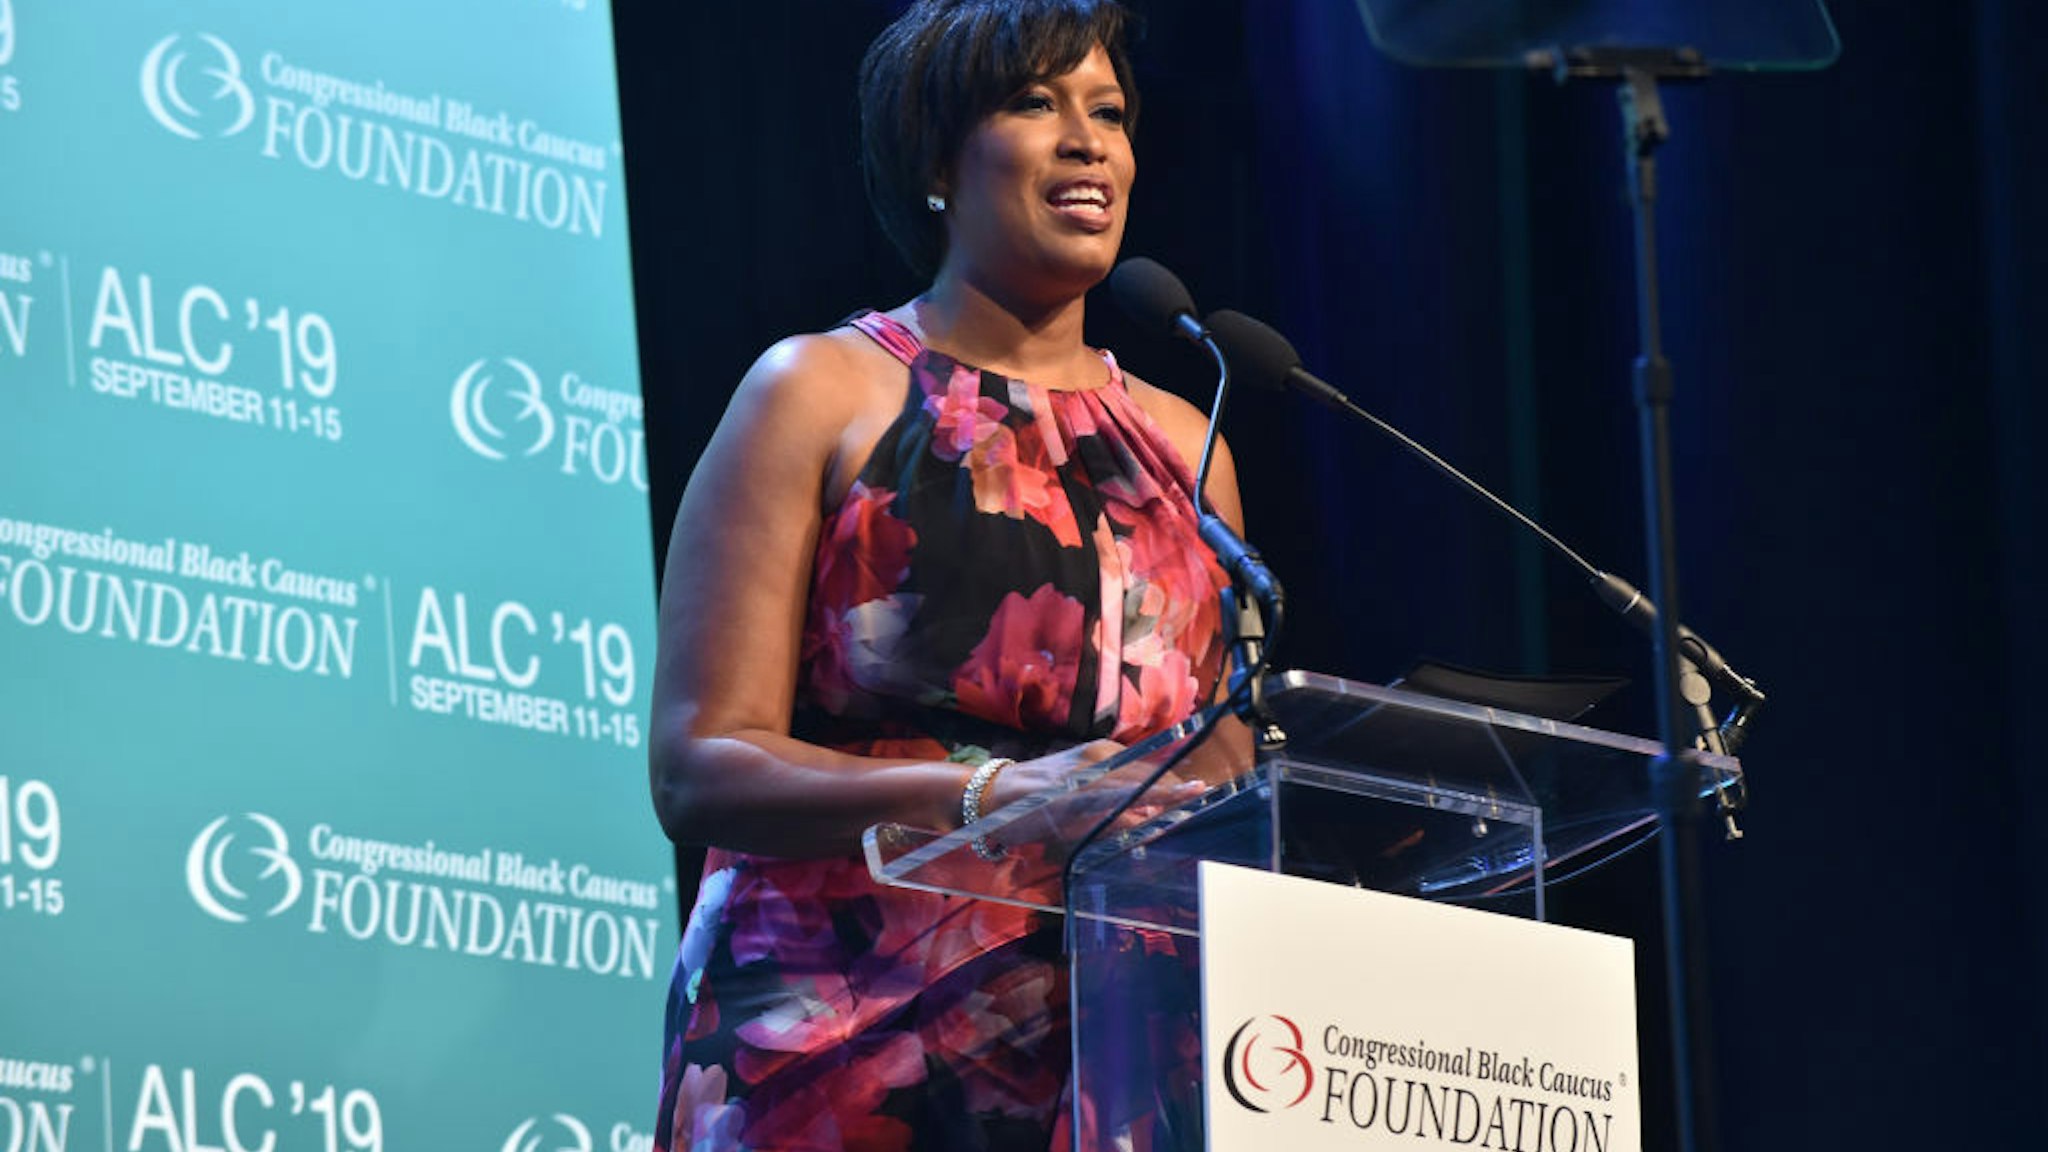 Washington DC Mayor Muriel Bowser speaks onstage at the Congressional Black Caucus' Annual Legislative Conference's Phoenix Awards Dinner at The Walter E. Washington Convention Center on September 14, 2019 in Washington, DC.